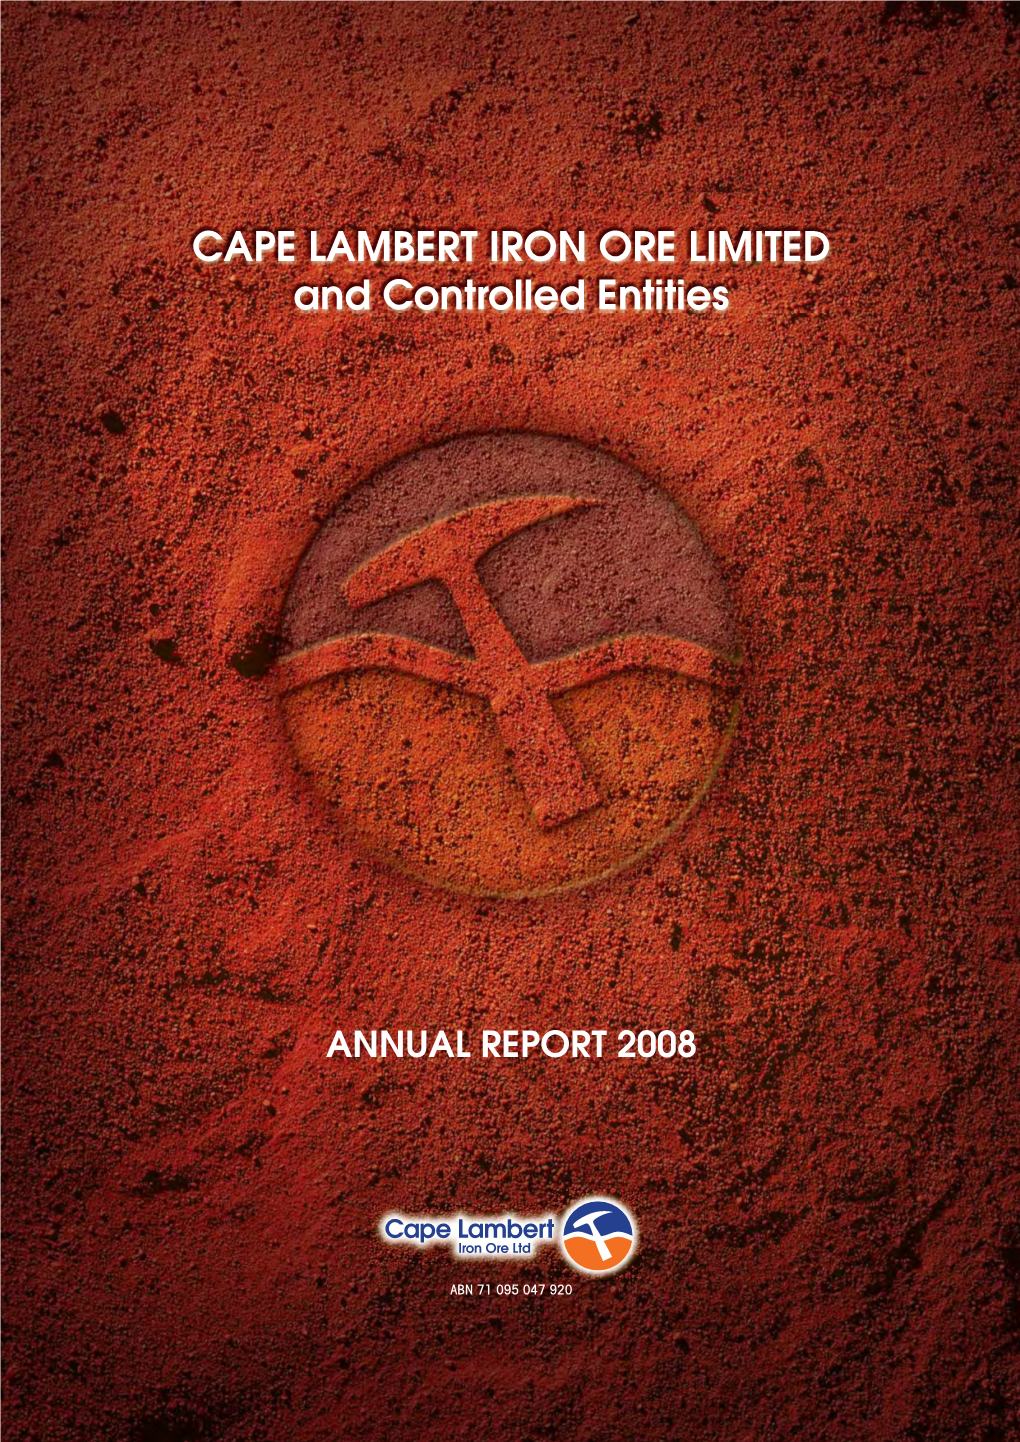 CAPE LAMBERT IRON ORE LIMITED and Controlled Entities